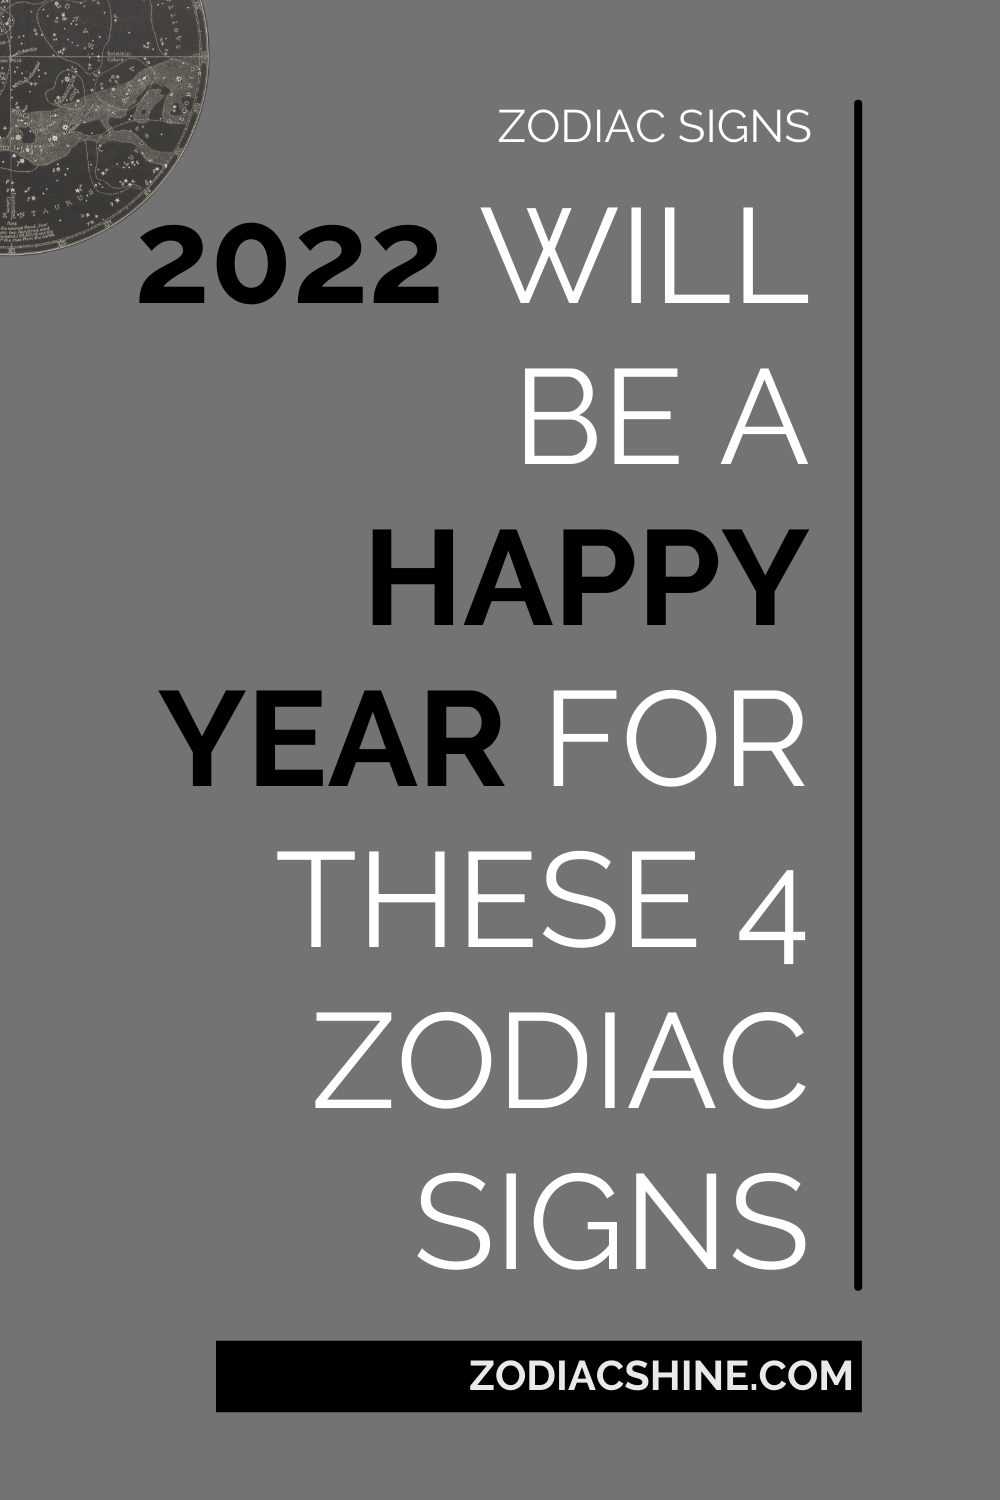 2022 Will Be A Happy Year For These 4 Zodiac Signs